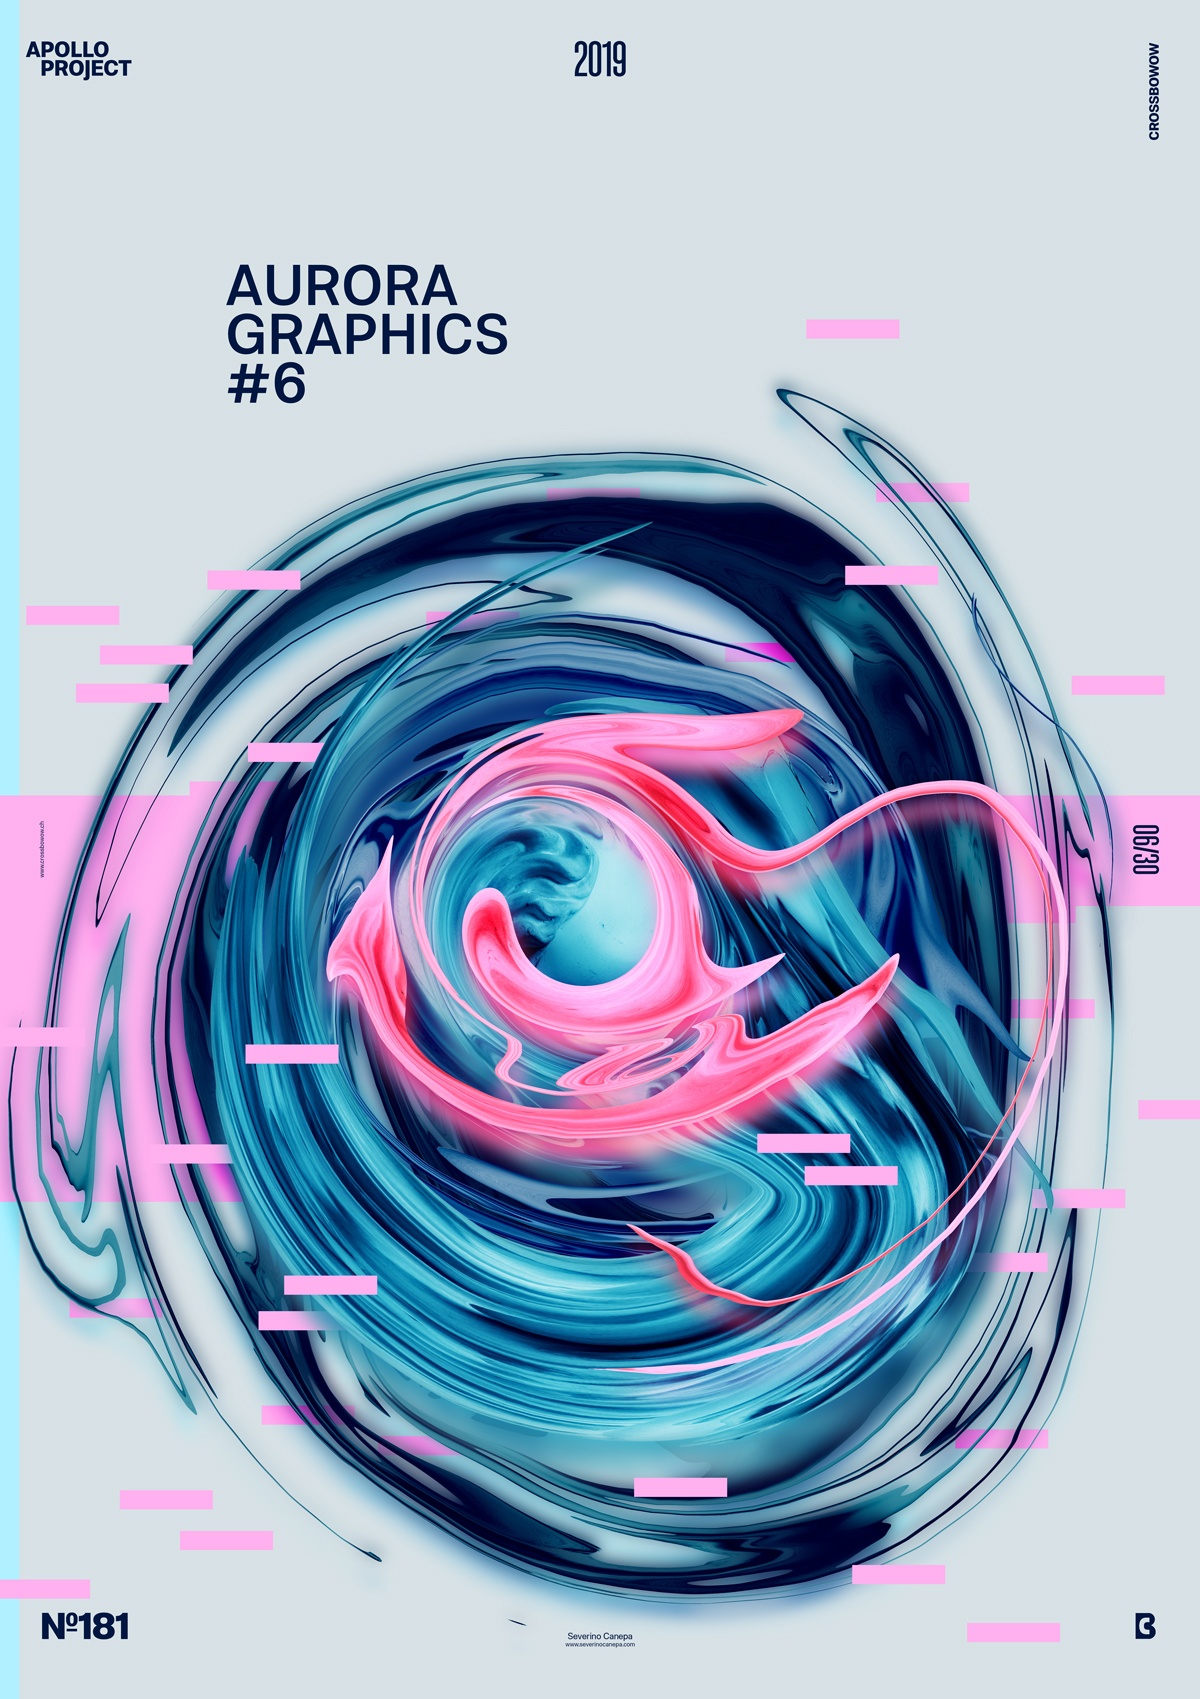 Creative and abstract poster design named Aurora Graphics 6